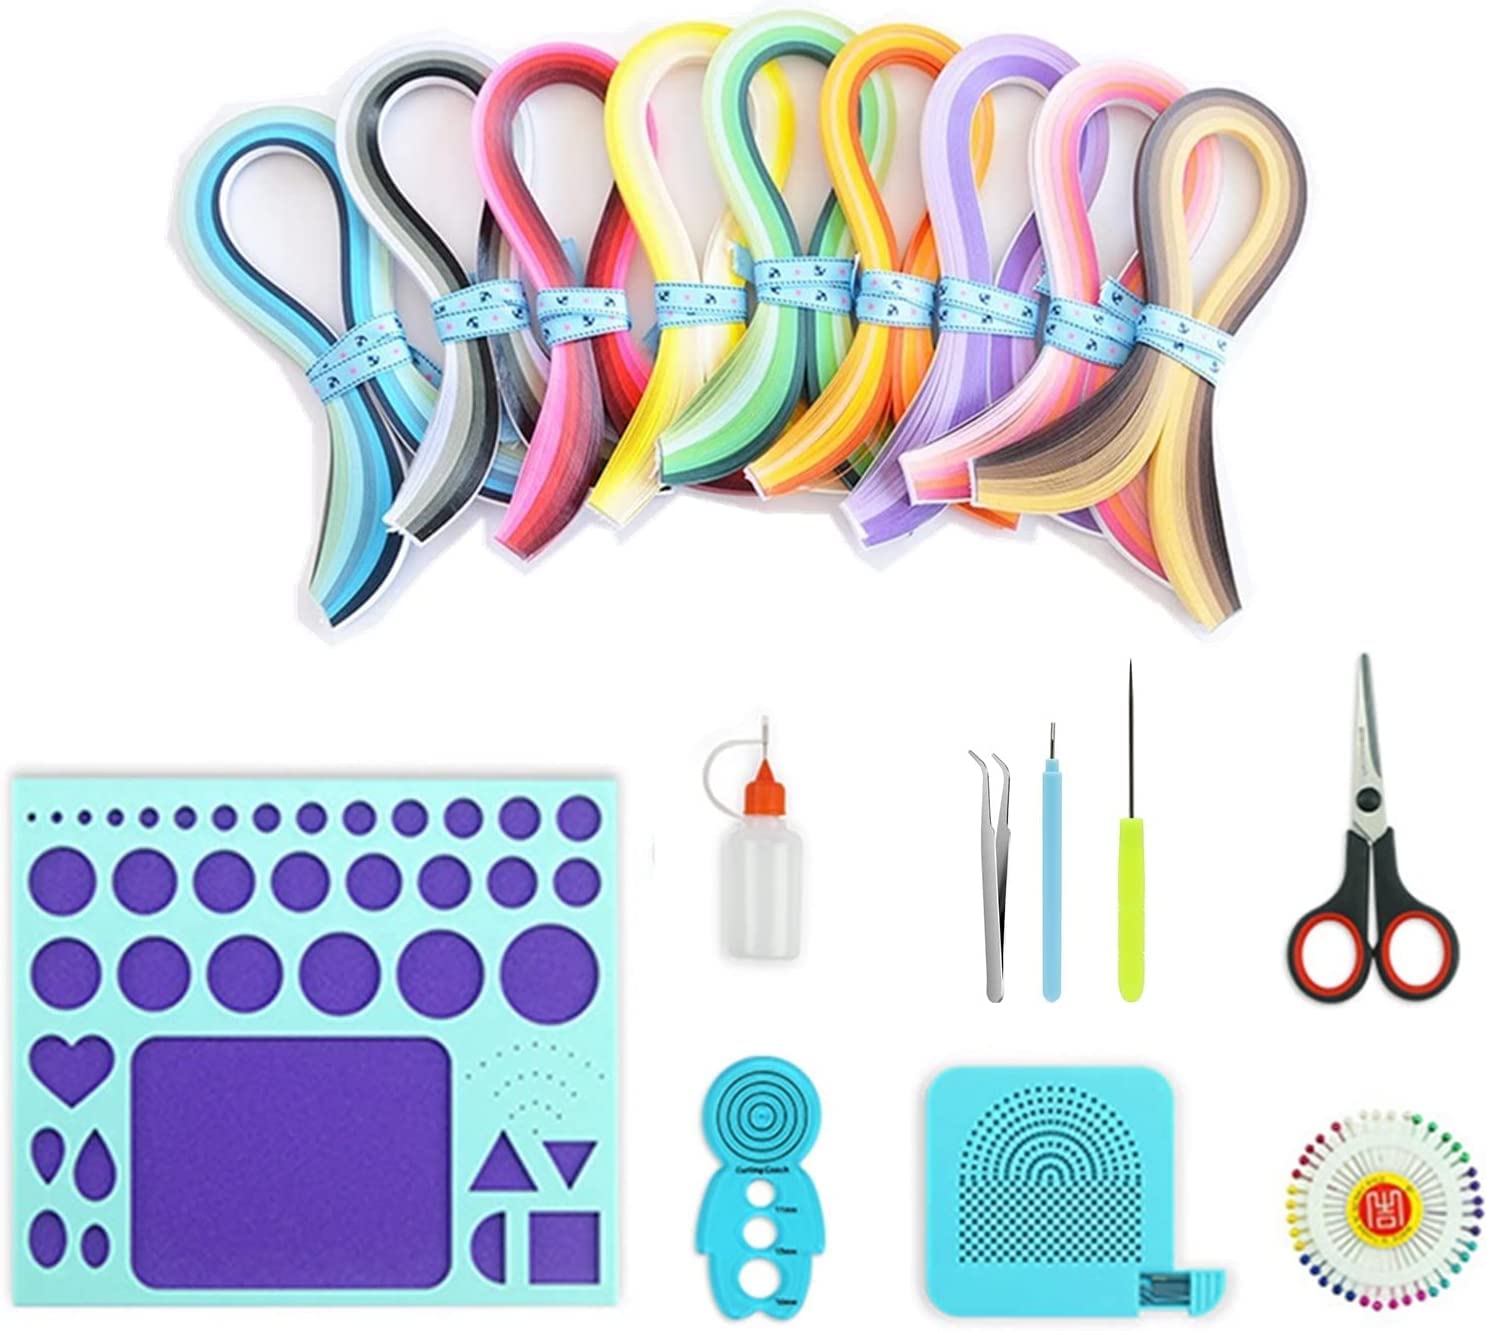 YURROAD Quilling Paper Set for Beginners with 36 Colors 900 Strips 3MM Quilling  Papers Quilling Template Board Quilling Comb Quilling Curling Coach Quilling  Slotted Pen Beginners quilling kit